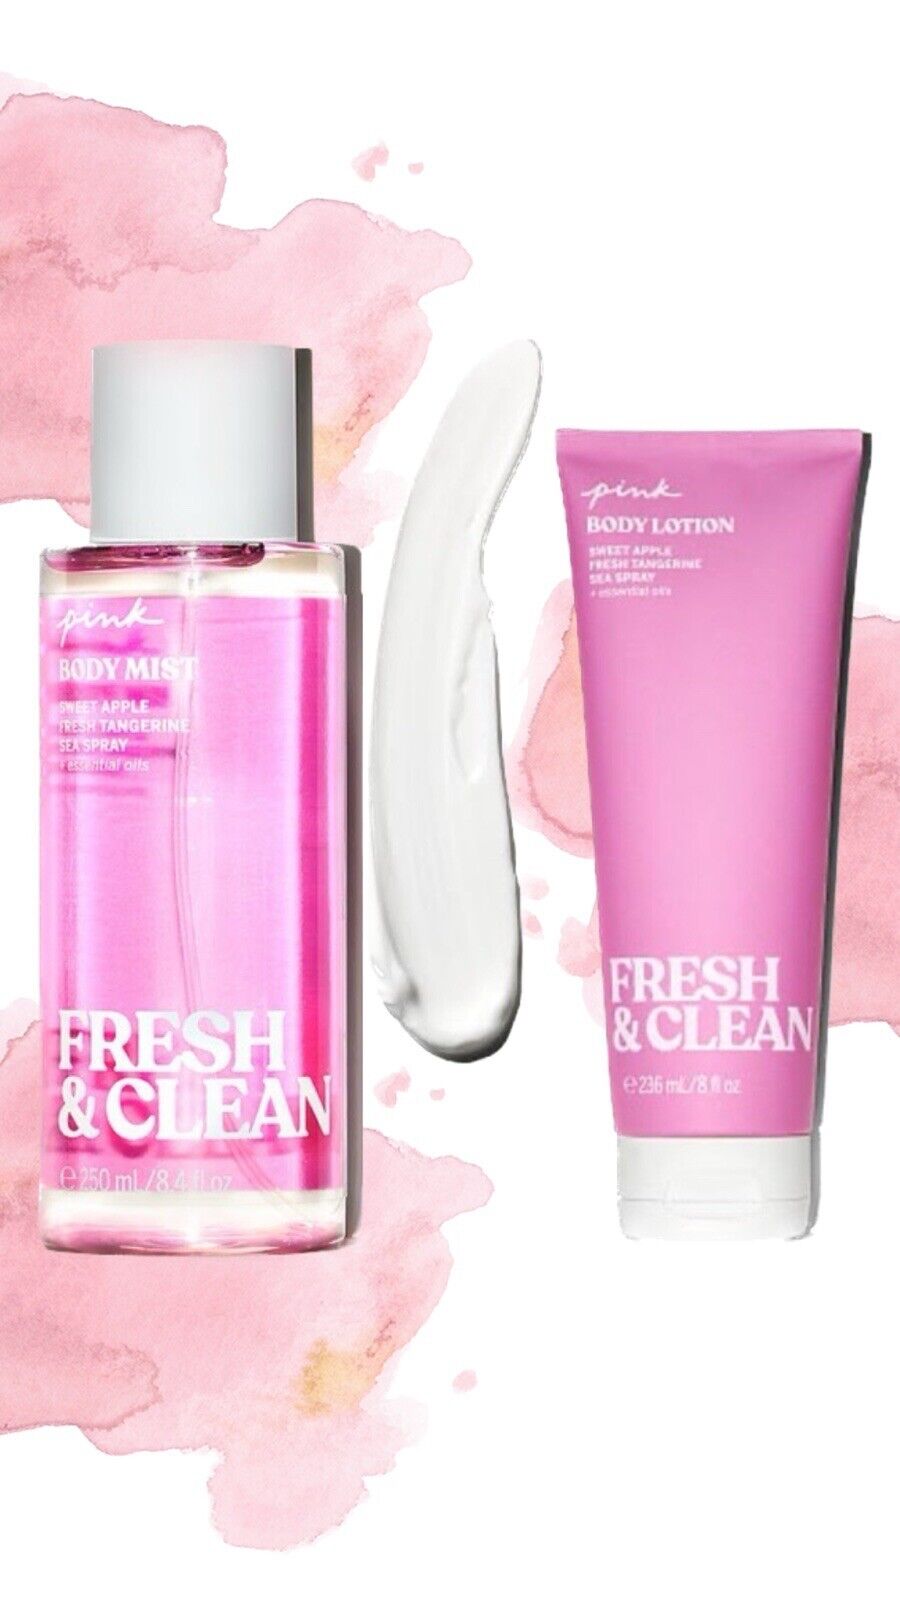 pink fresh and clean body mist + Lotion